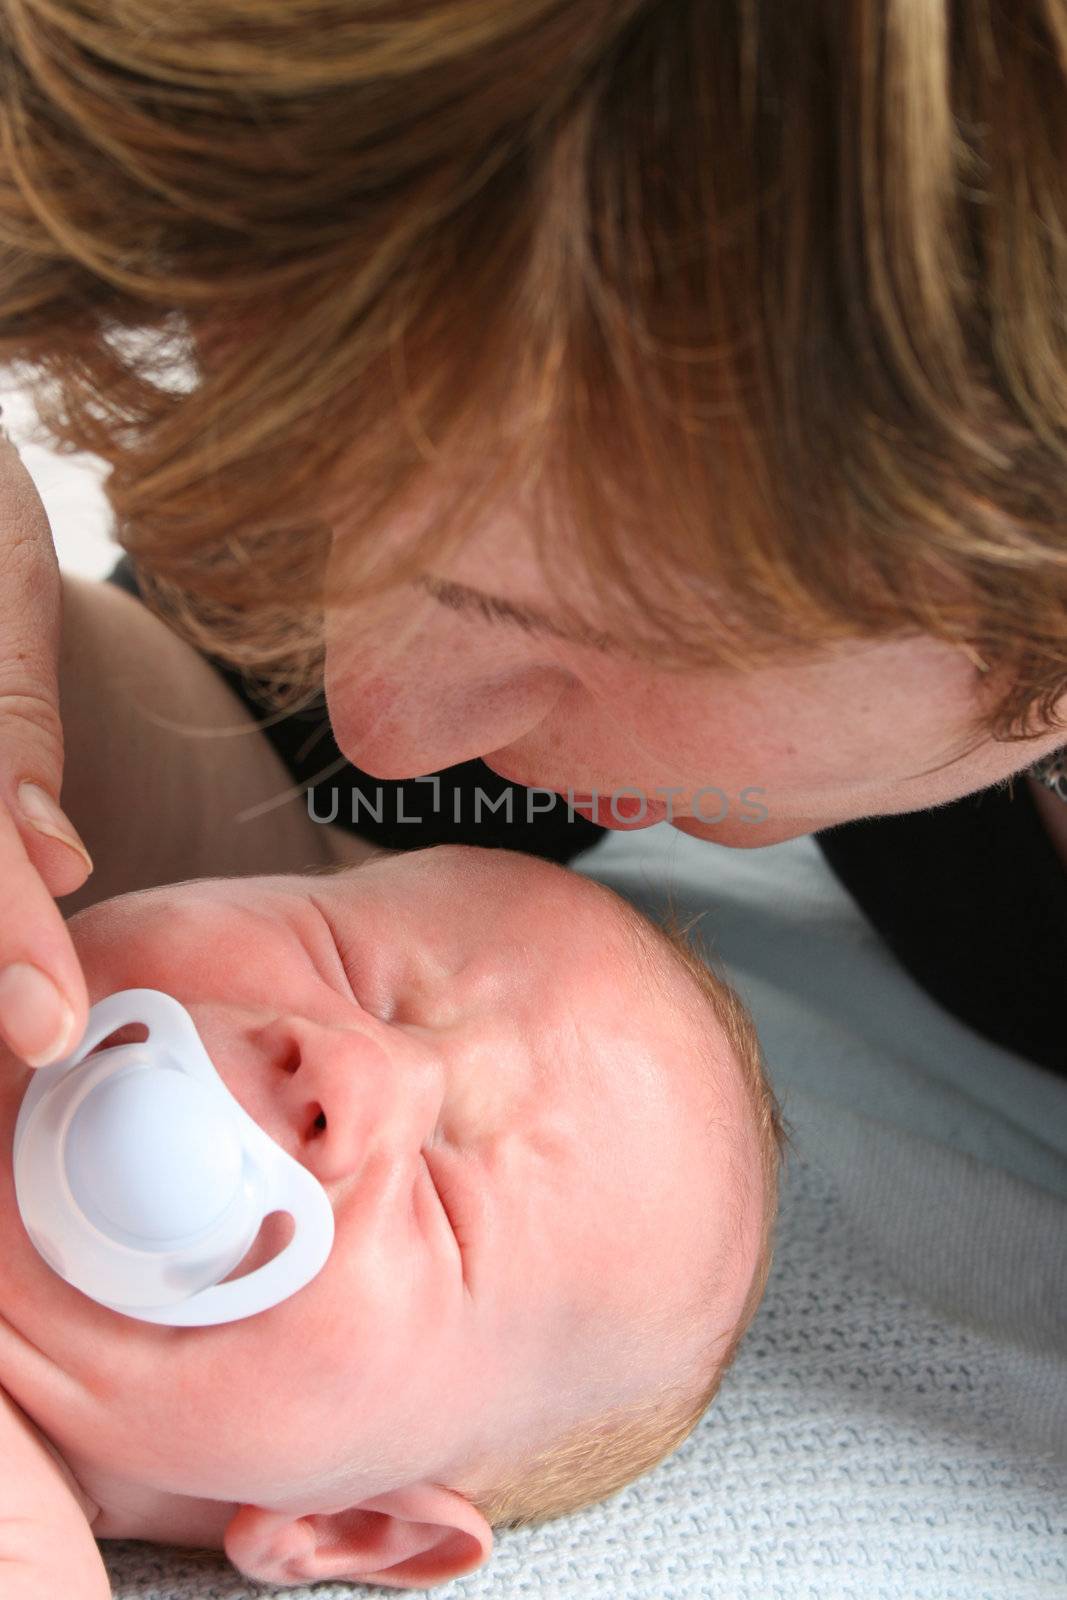 Worried mother and crying newborn baby with dummy